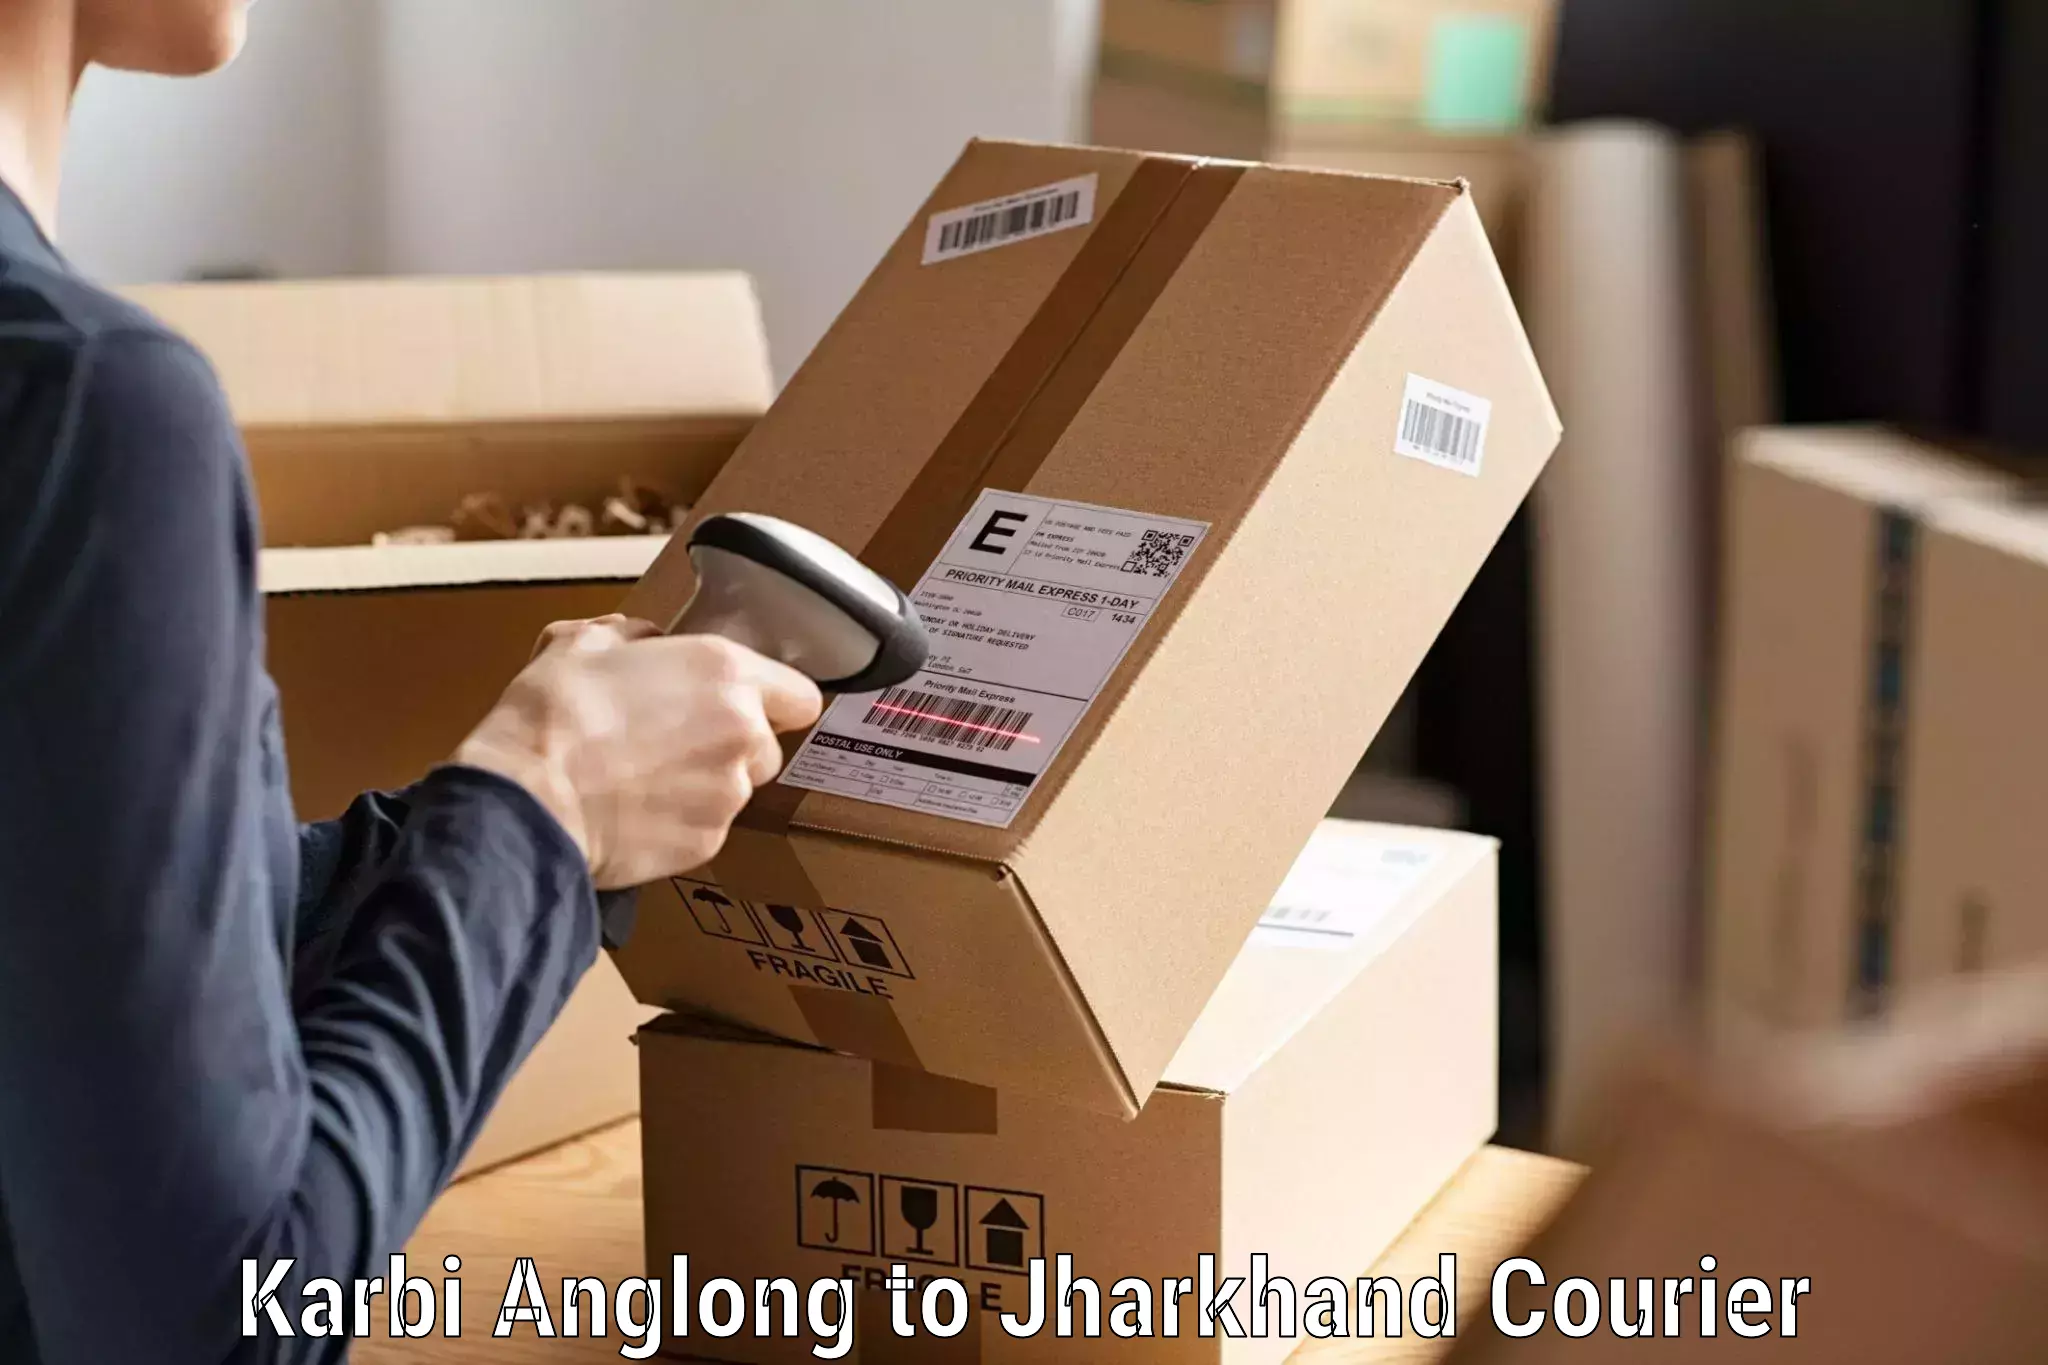 Express courier capabilities Karbi Anglong to Latehar